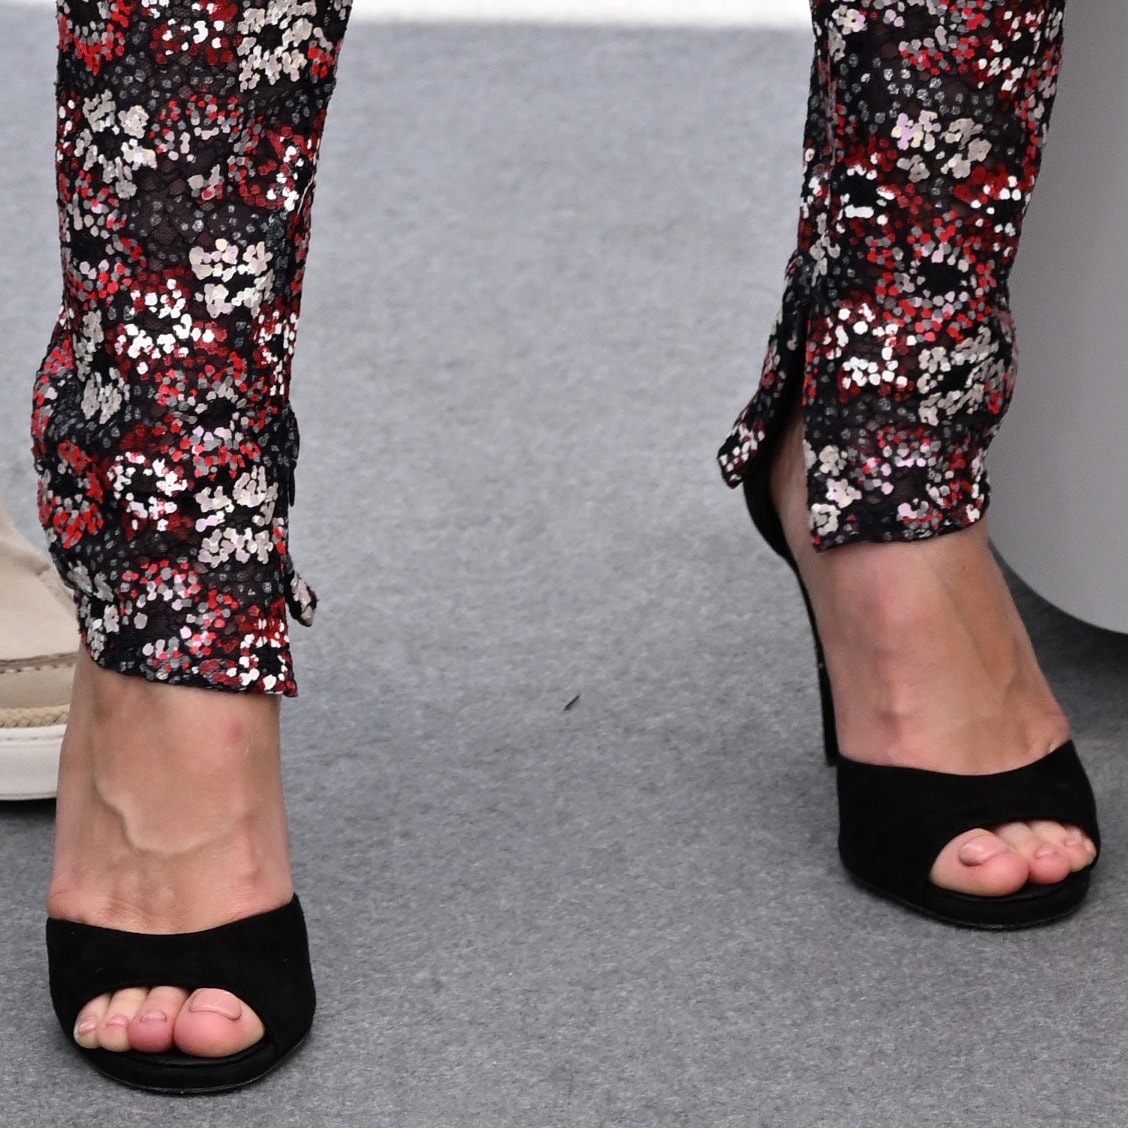 Brie Larson shows off her feet in black sandals featuring an almond toe and a curved toe strap